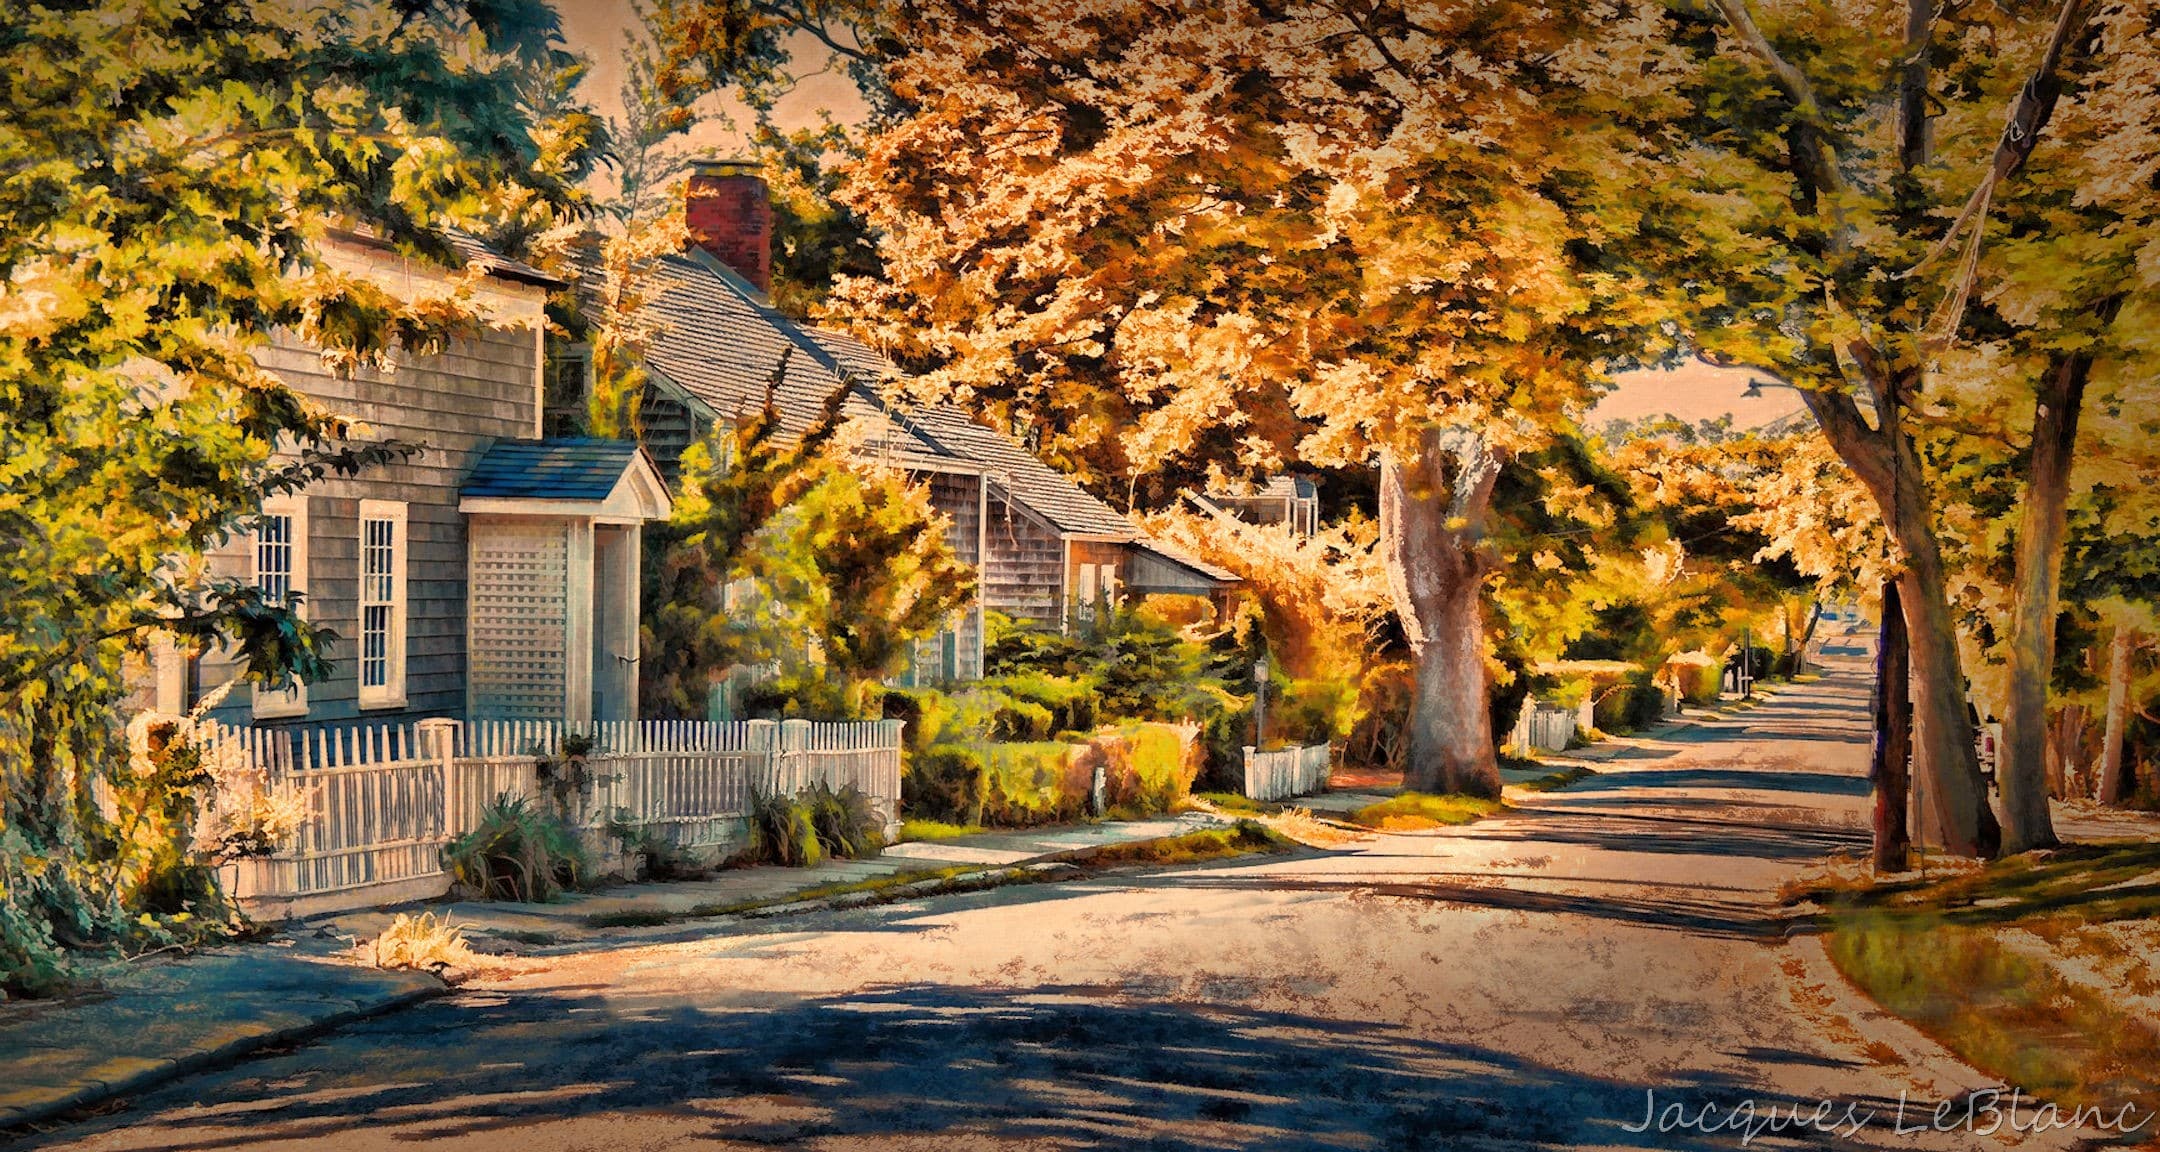 The afternoon sun on this fall day favors one side of Garden Street in Sag Harbor New York's Historic District.